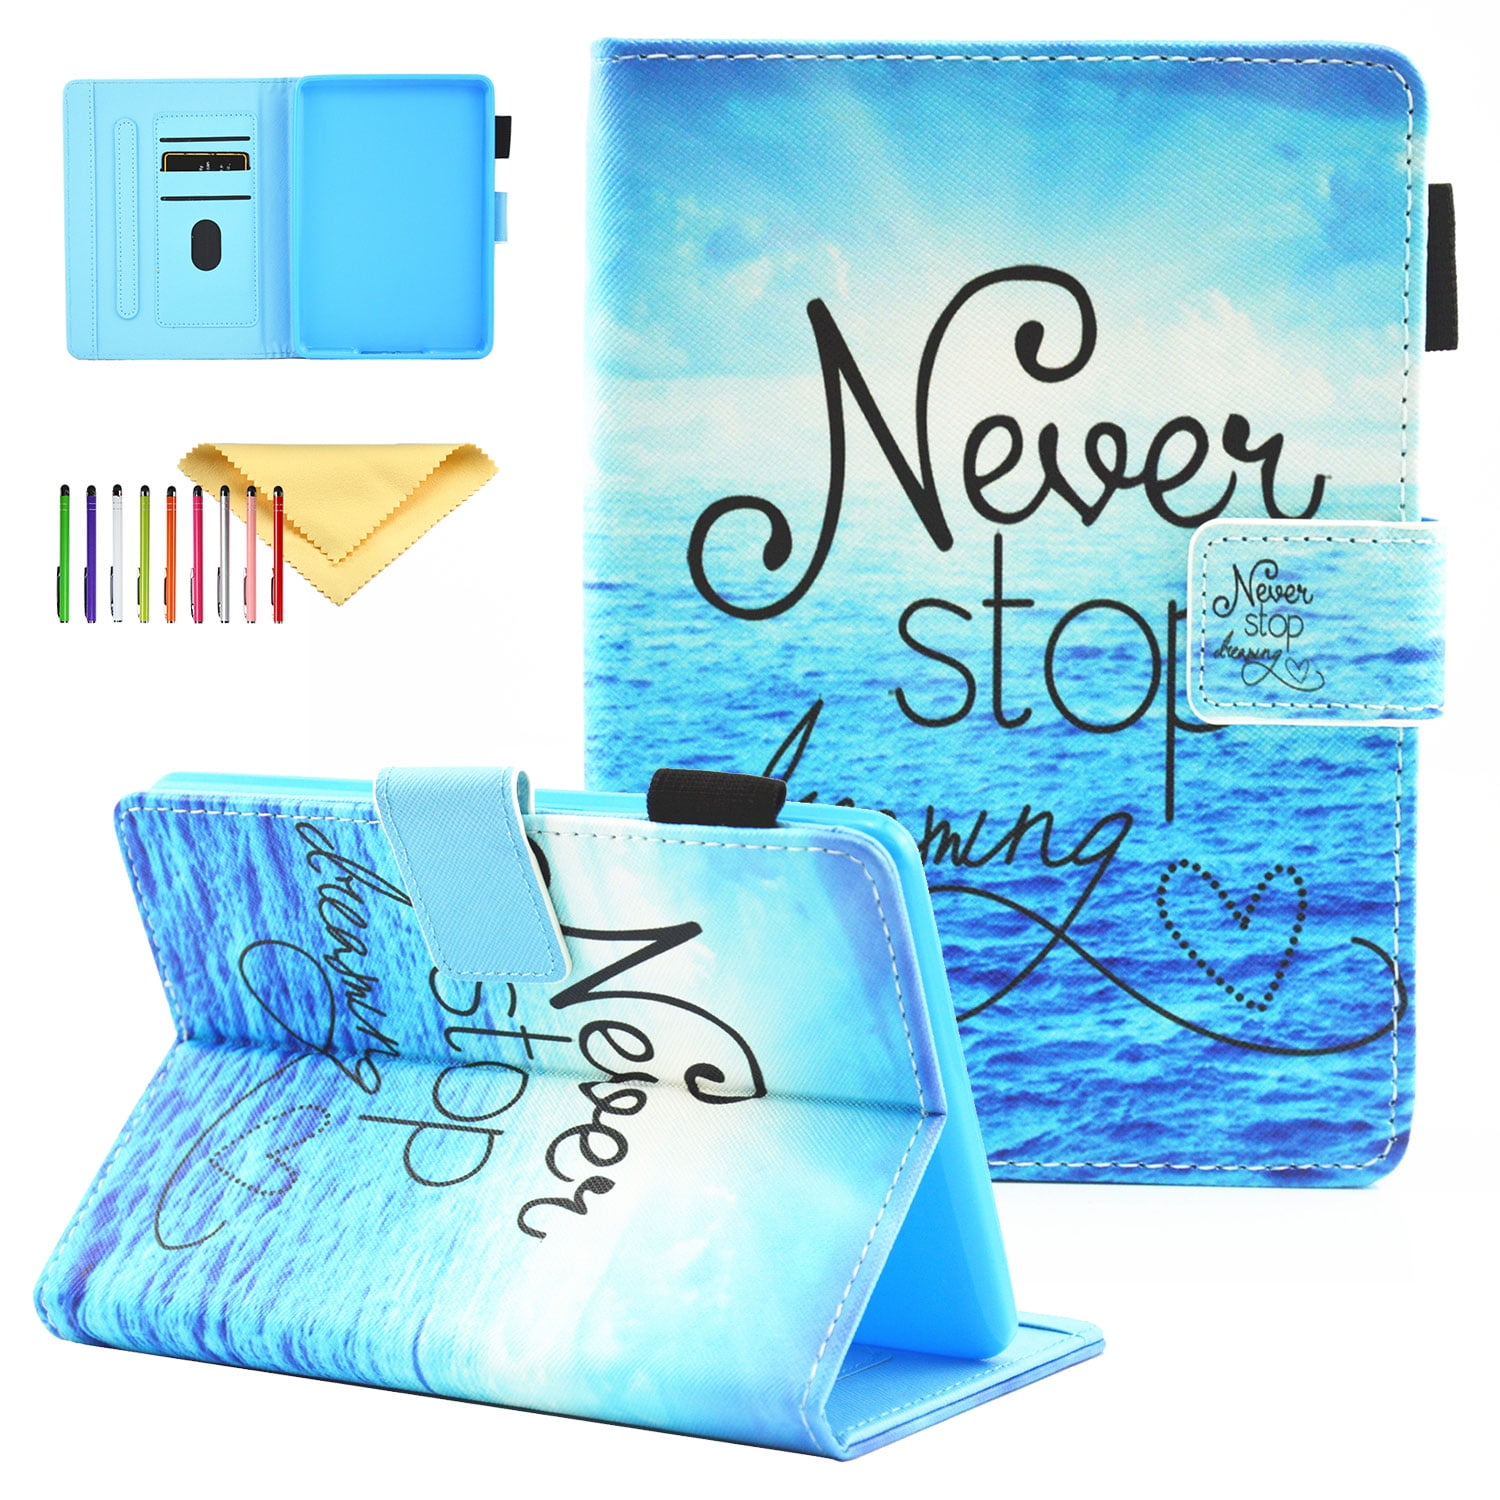 UUCOVERS For 6.8 Kindle Paperwhite (11th Generation-2021) and Kindle  Paperwhite Signature Edition, Slim Lightweight Cases and Covers with Card  Slots Kickstand Smart Case Kids, Colorful Diamonds 